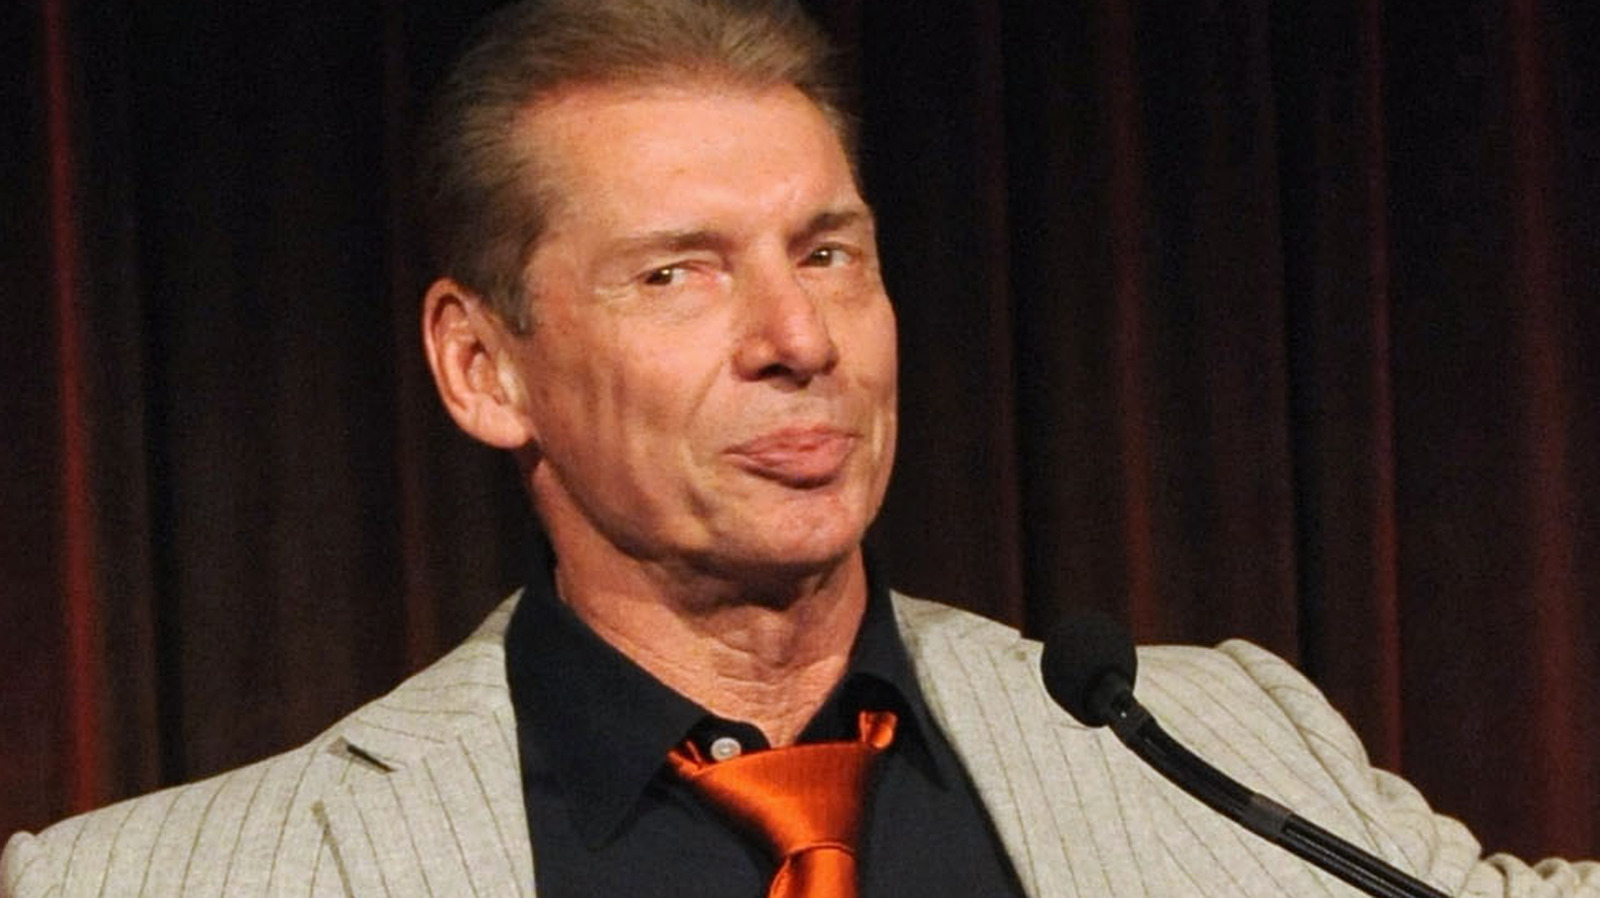 WWE Chairman Vince McMahon Denies Sex Trafficking Allegations, Vows To Defend Himself